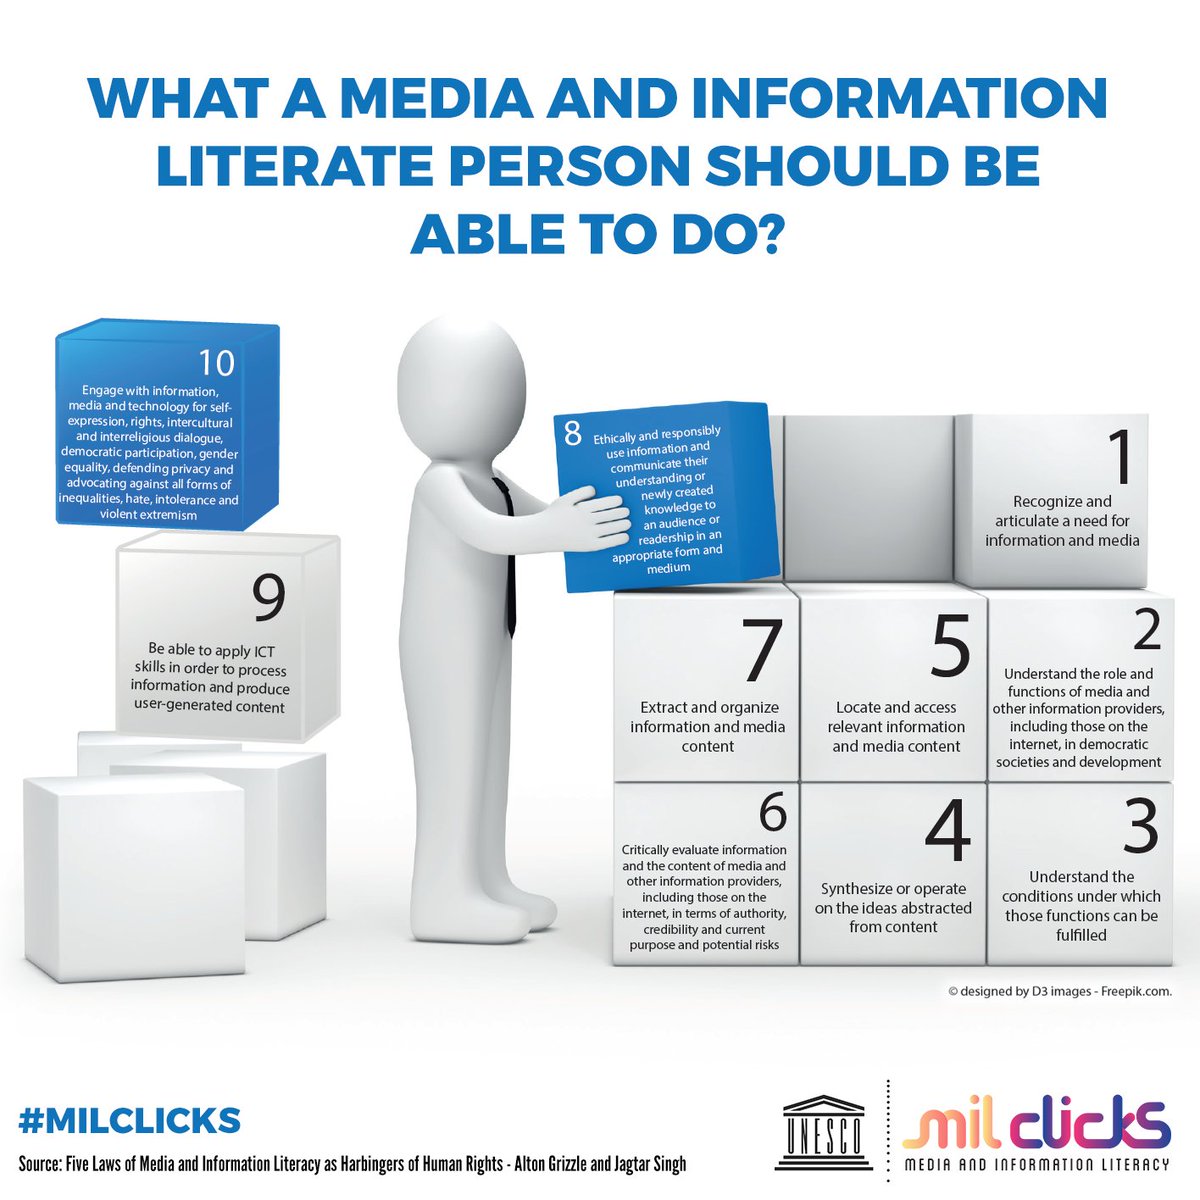 What a media and information literate person should be able to do?